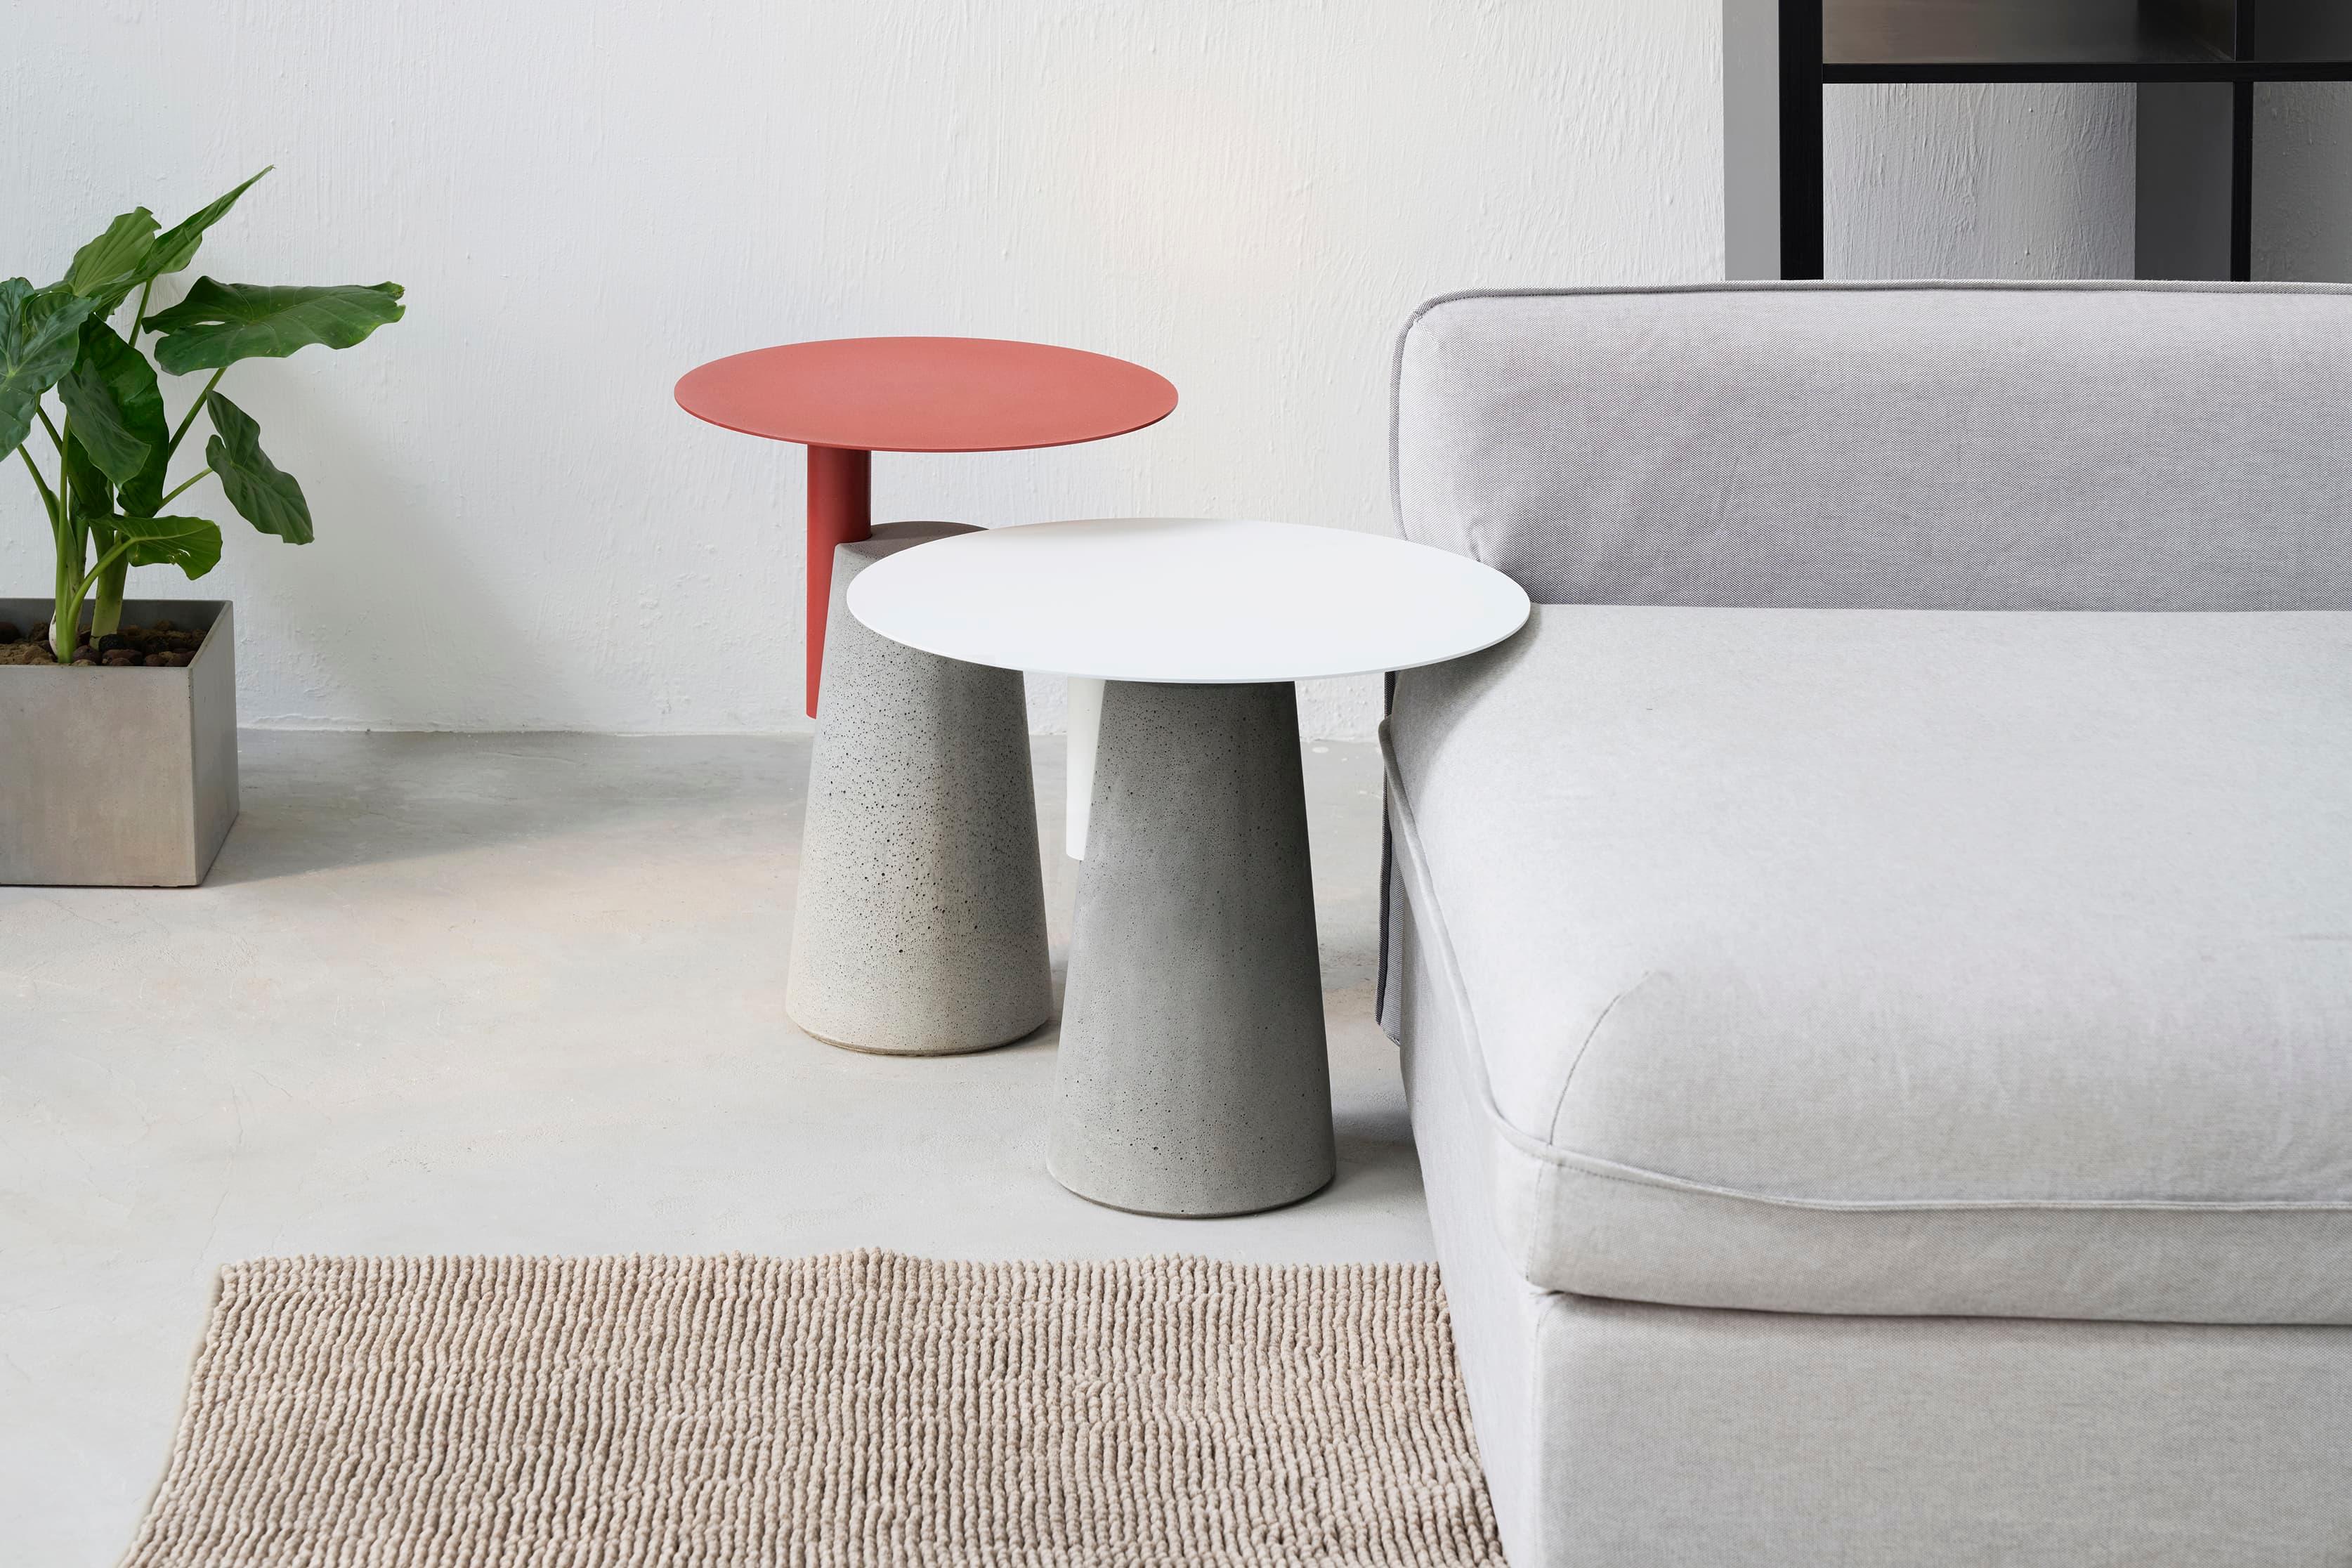 'BAI' is a collection of side table
by Bentu Design

Table top: steel
Table base: concrete

3 sizes available: 
- Small H 45 cm, D 50 cm
- Medium H 52 cm, D 40 cm
- Large H 60 cm, D 45 cm

3 colors available: 
Black
White
Red

Bentu